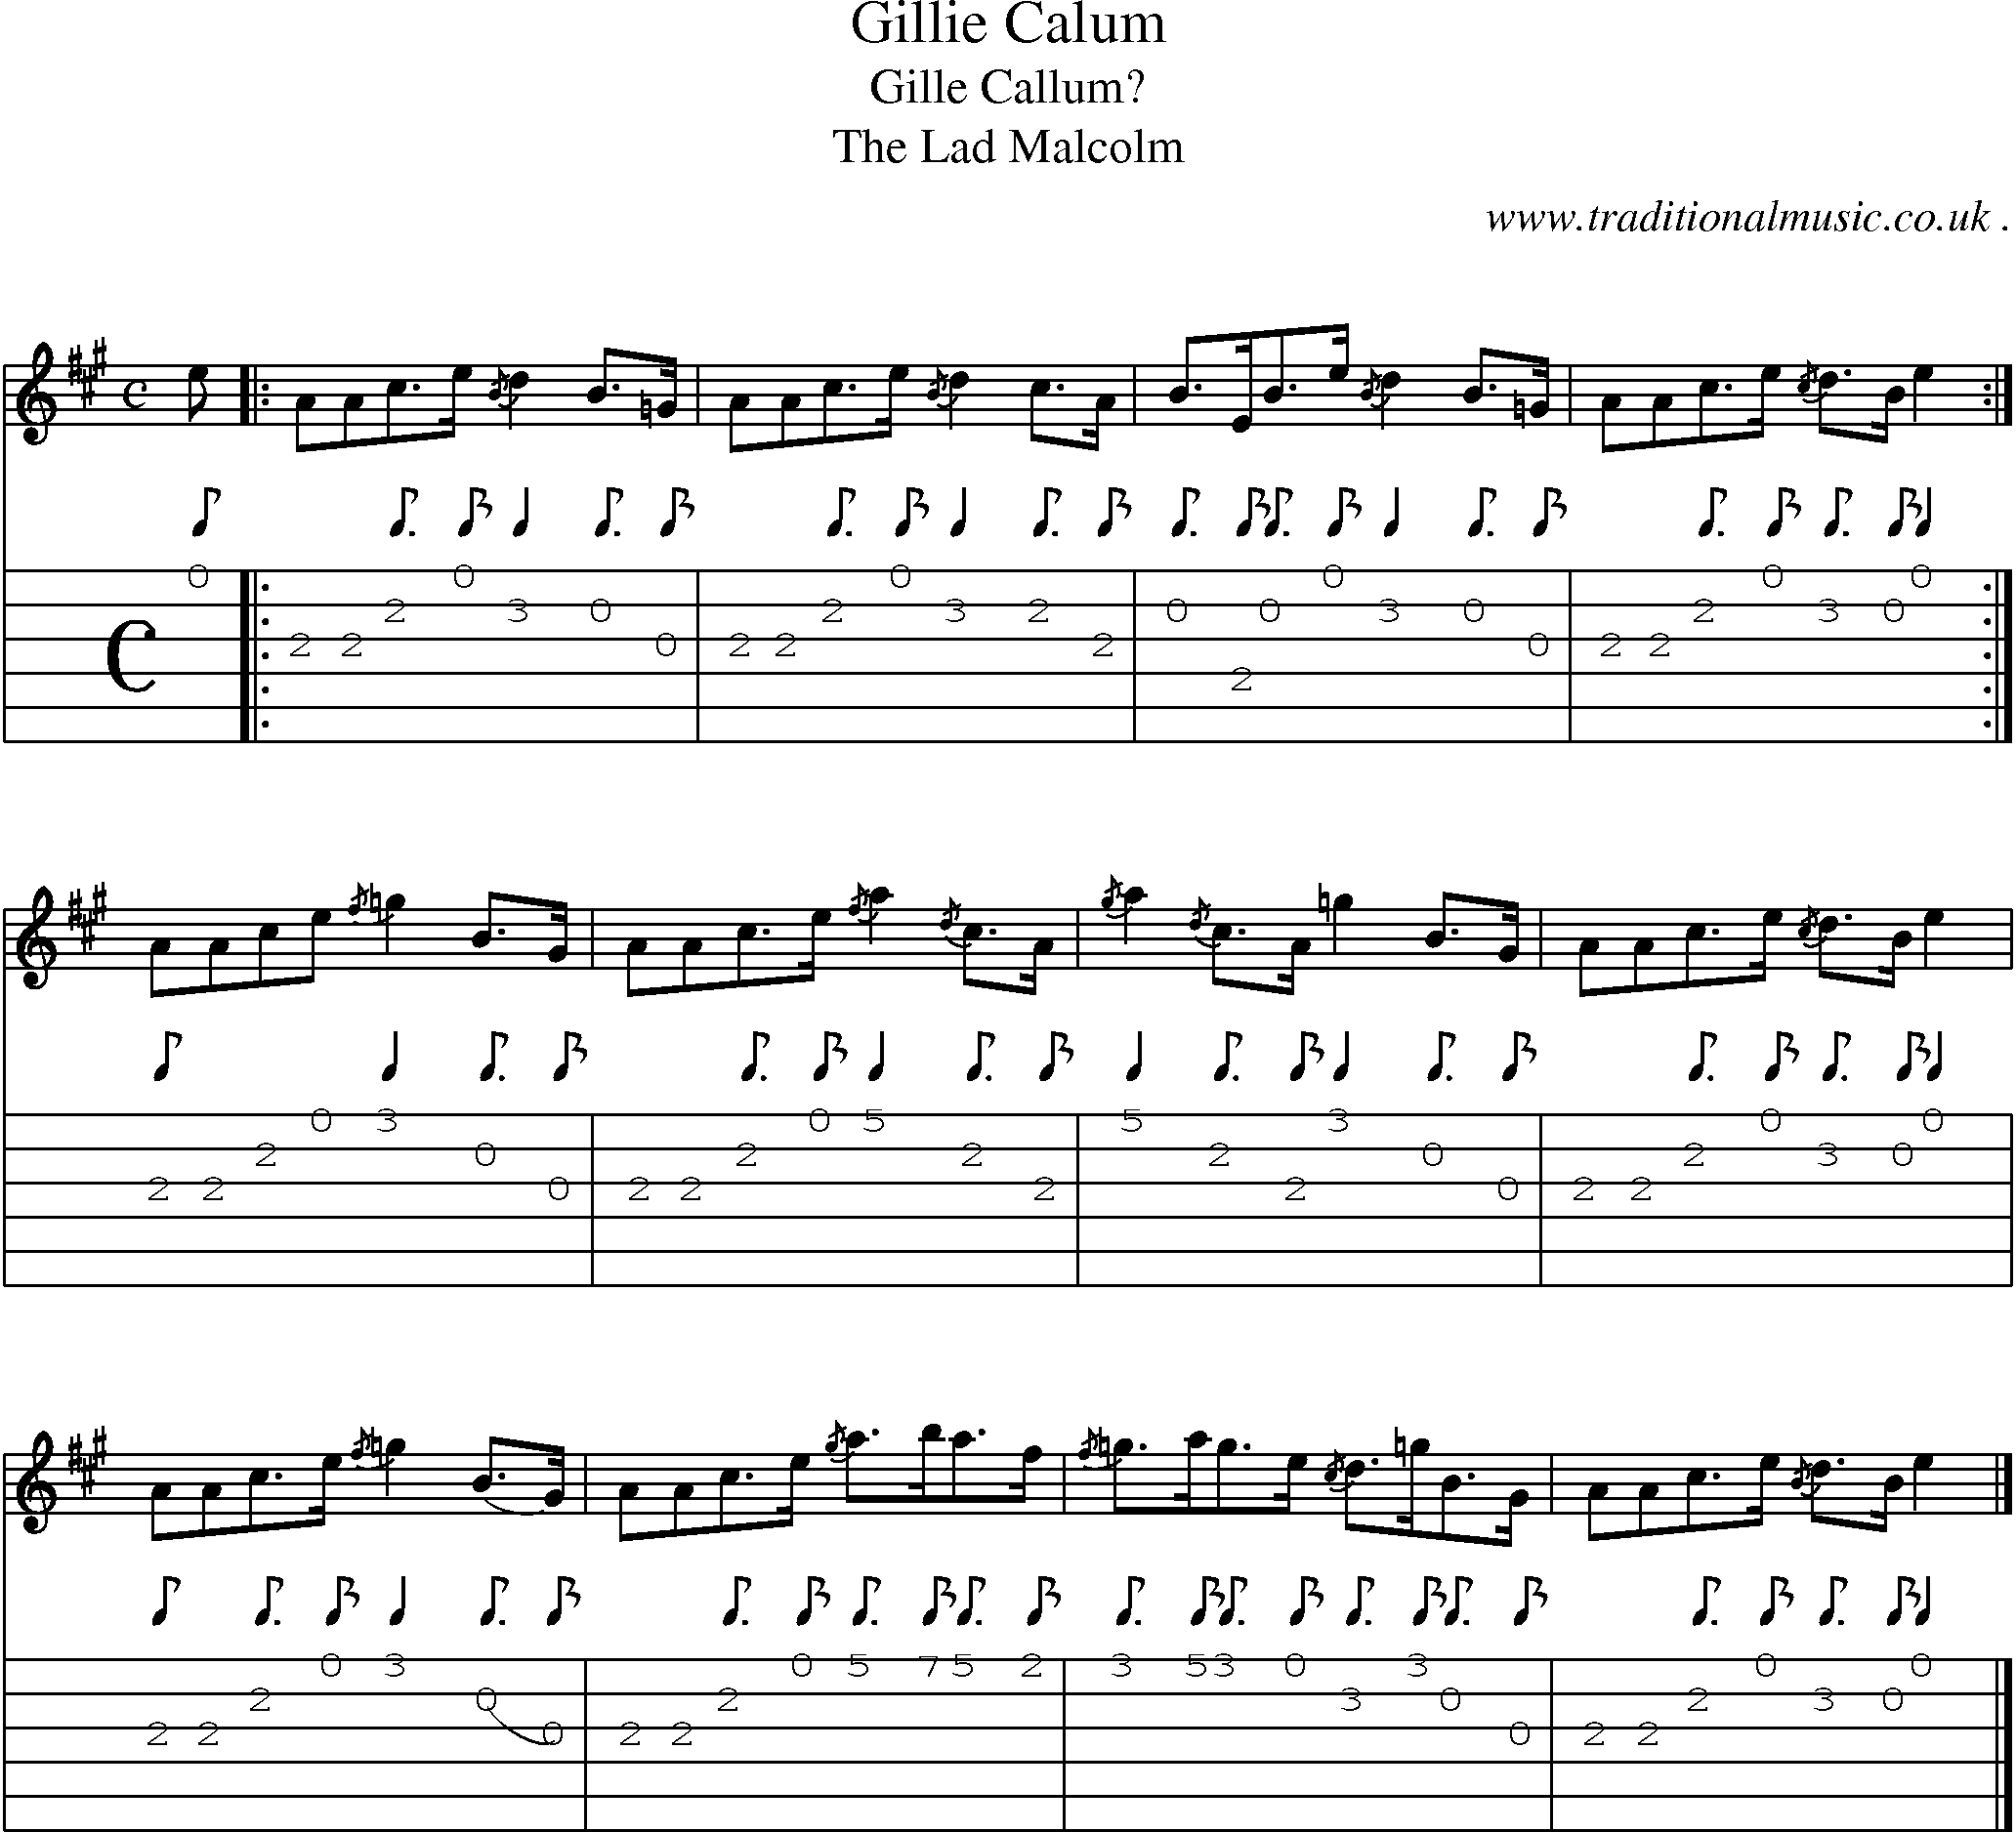 Sheet-music  score, Chords and Guitar Tabs for Gillie Calum